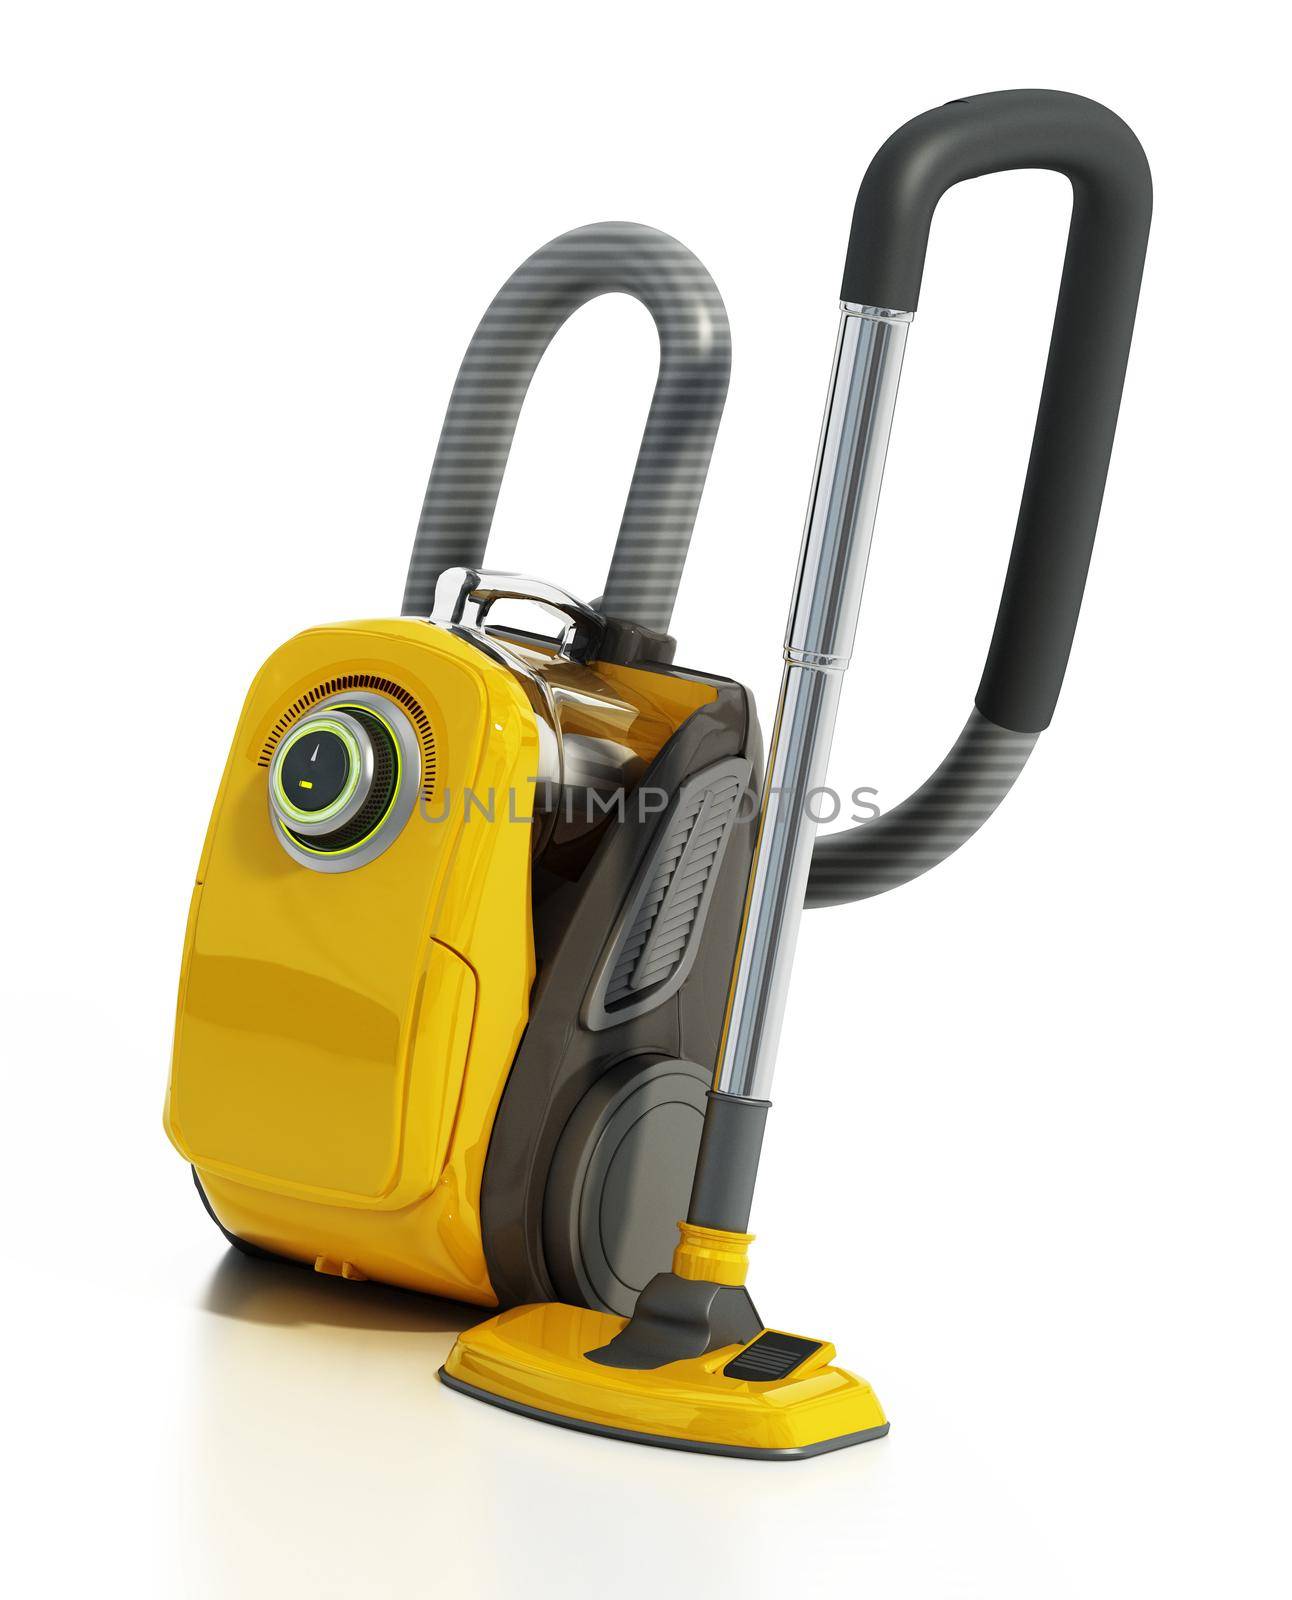 Vacuum cleaner isolated on white background. 3D illustration by Simsek